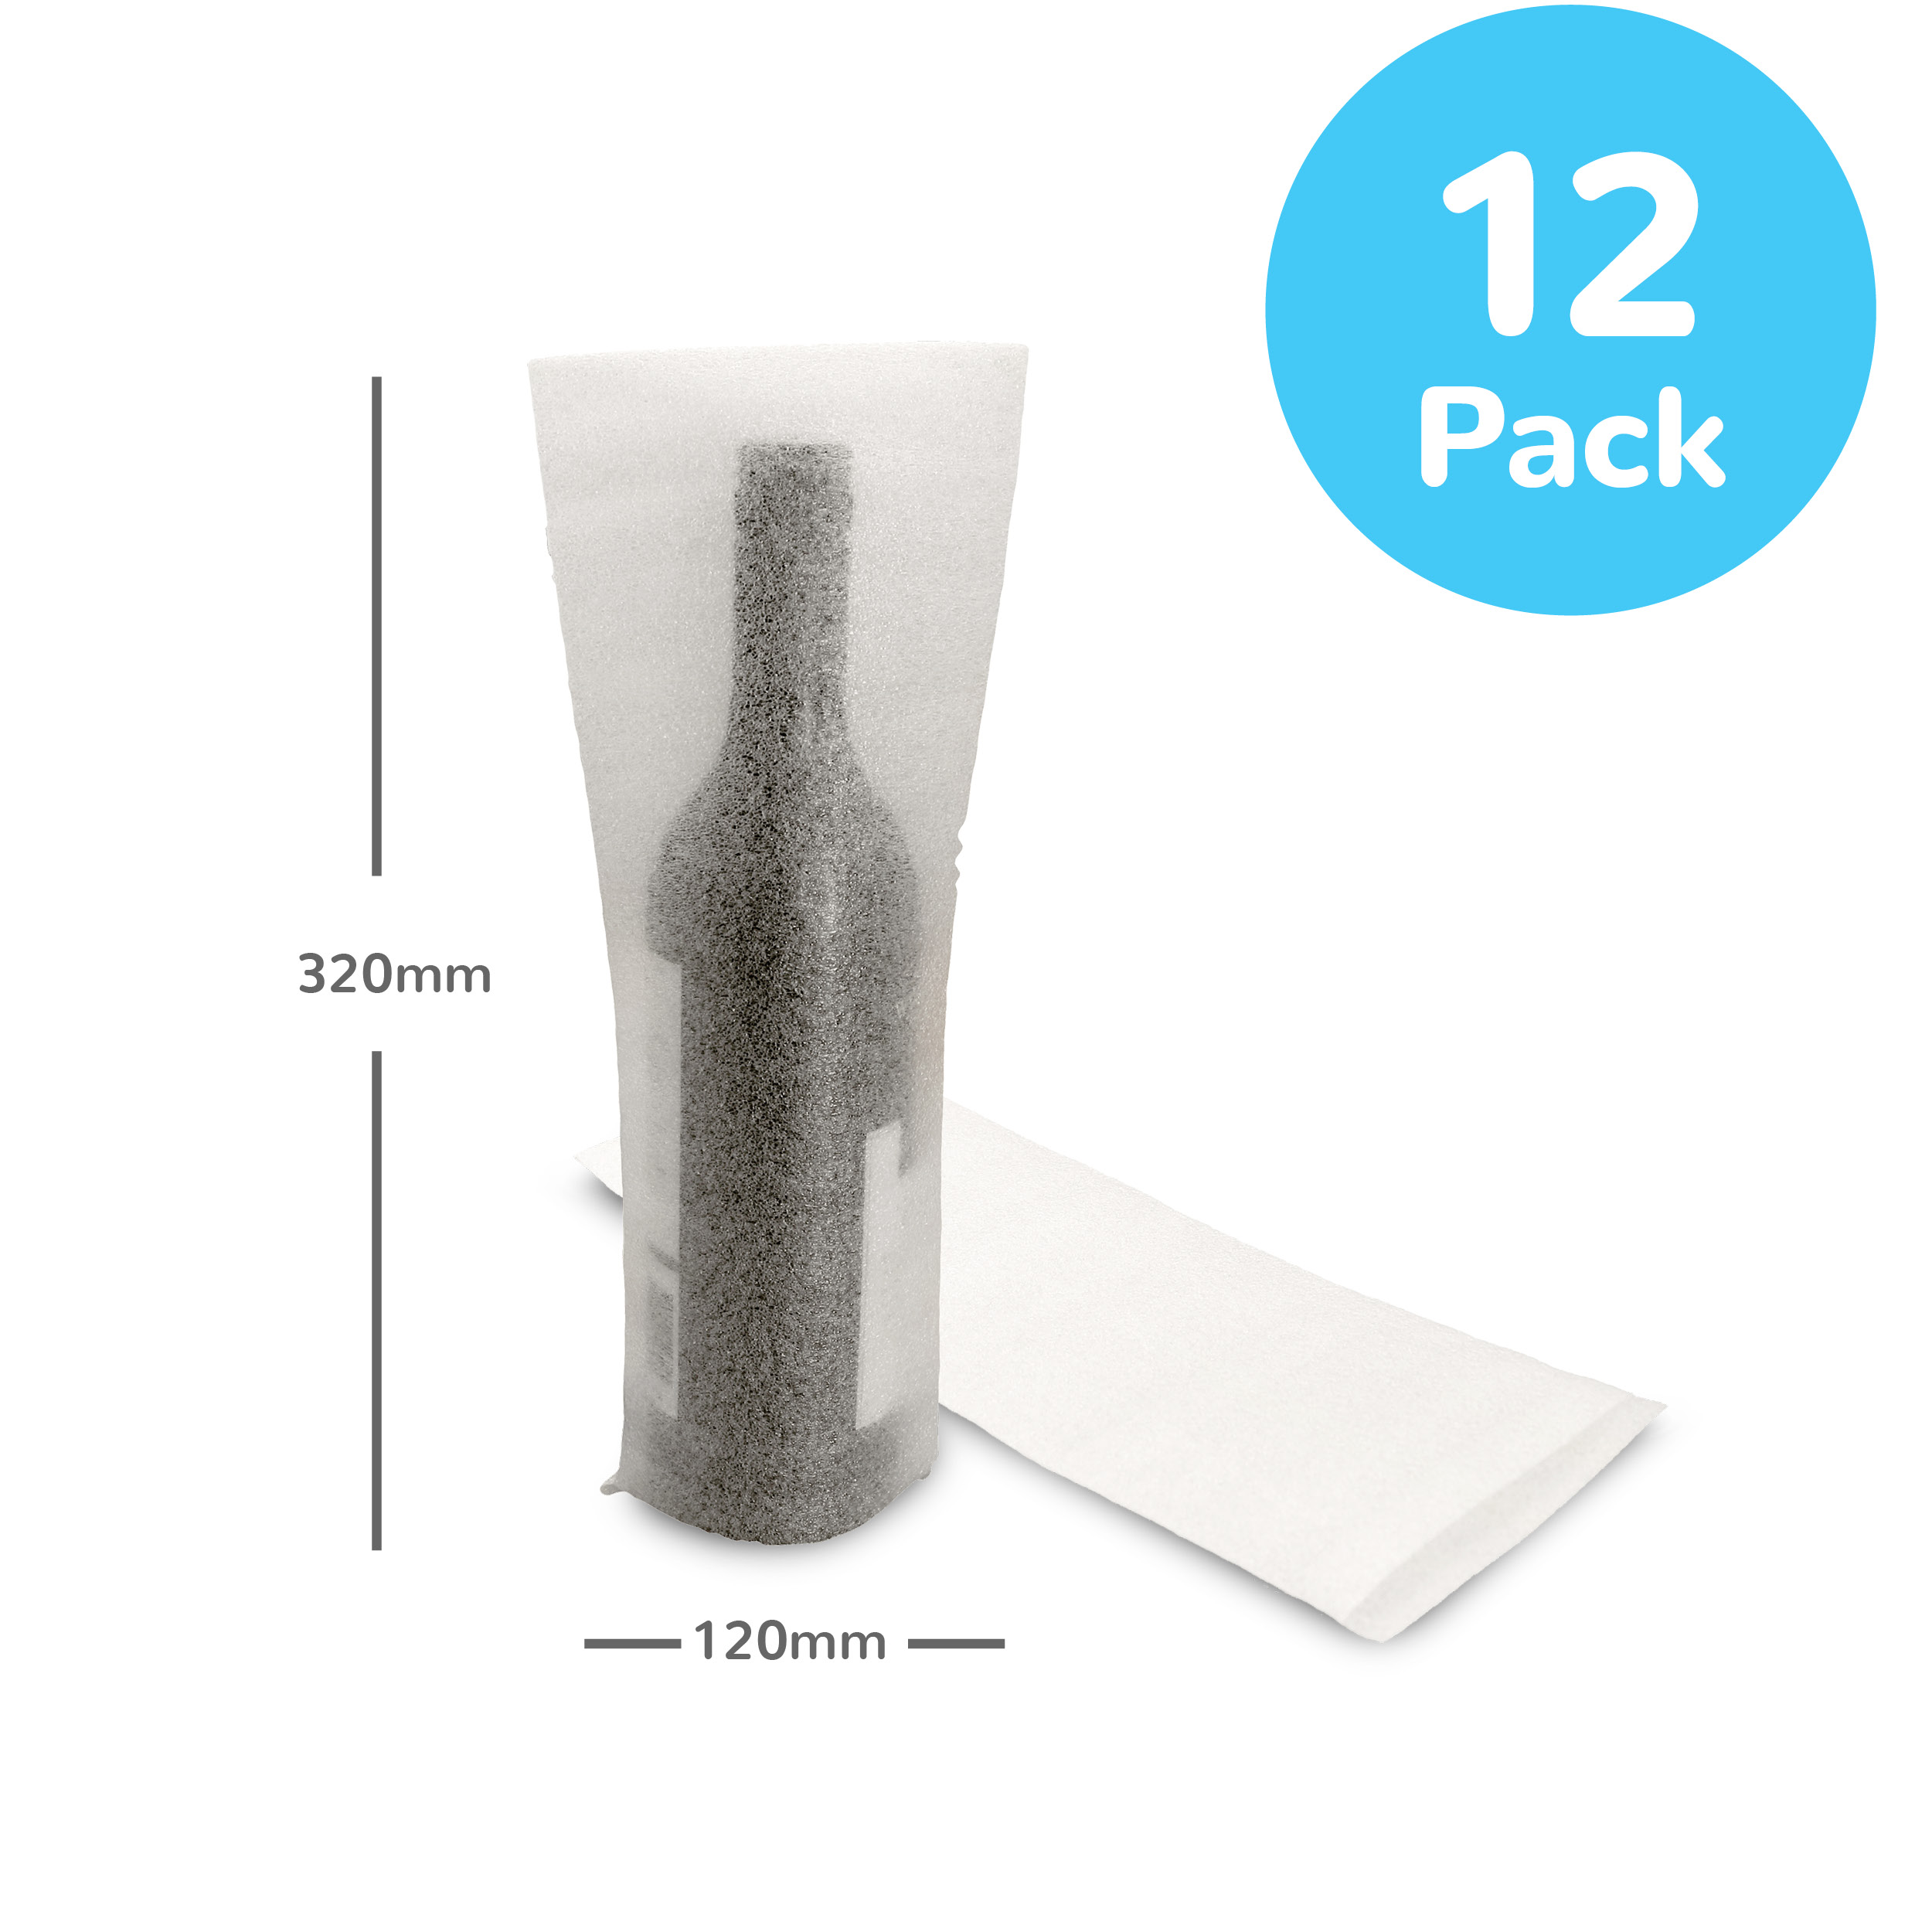 BigNs 50pcs Cushion Foam Pouches 7 x 12 Packing Supplies for Protecting Dishes Glasses Wine Bottles and Shipping Supplies 